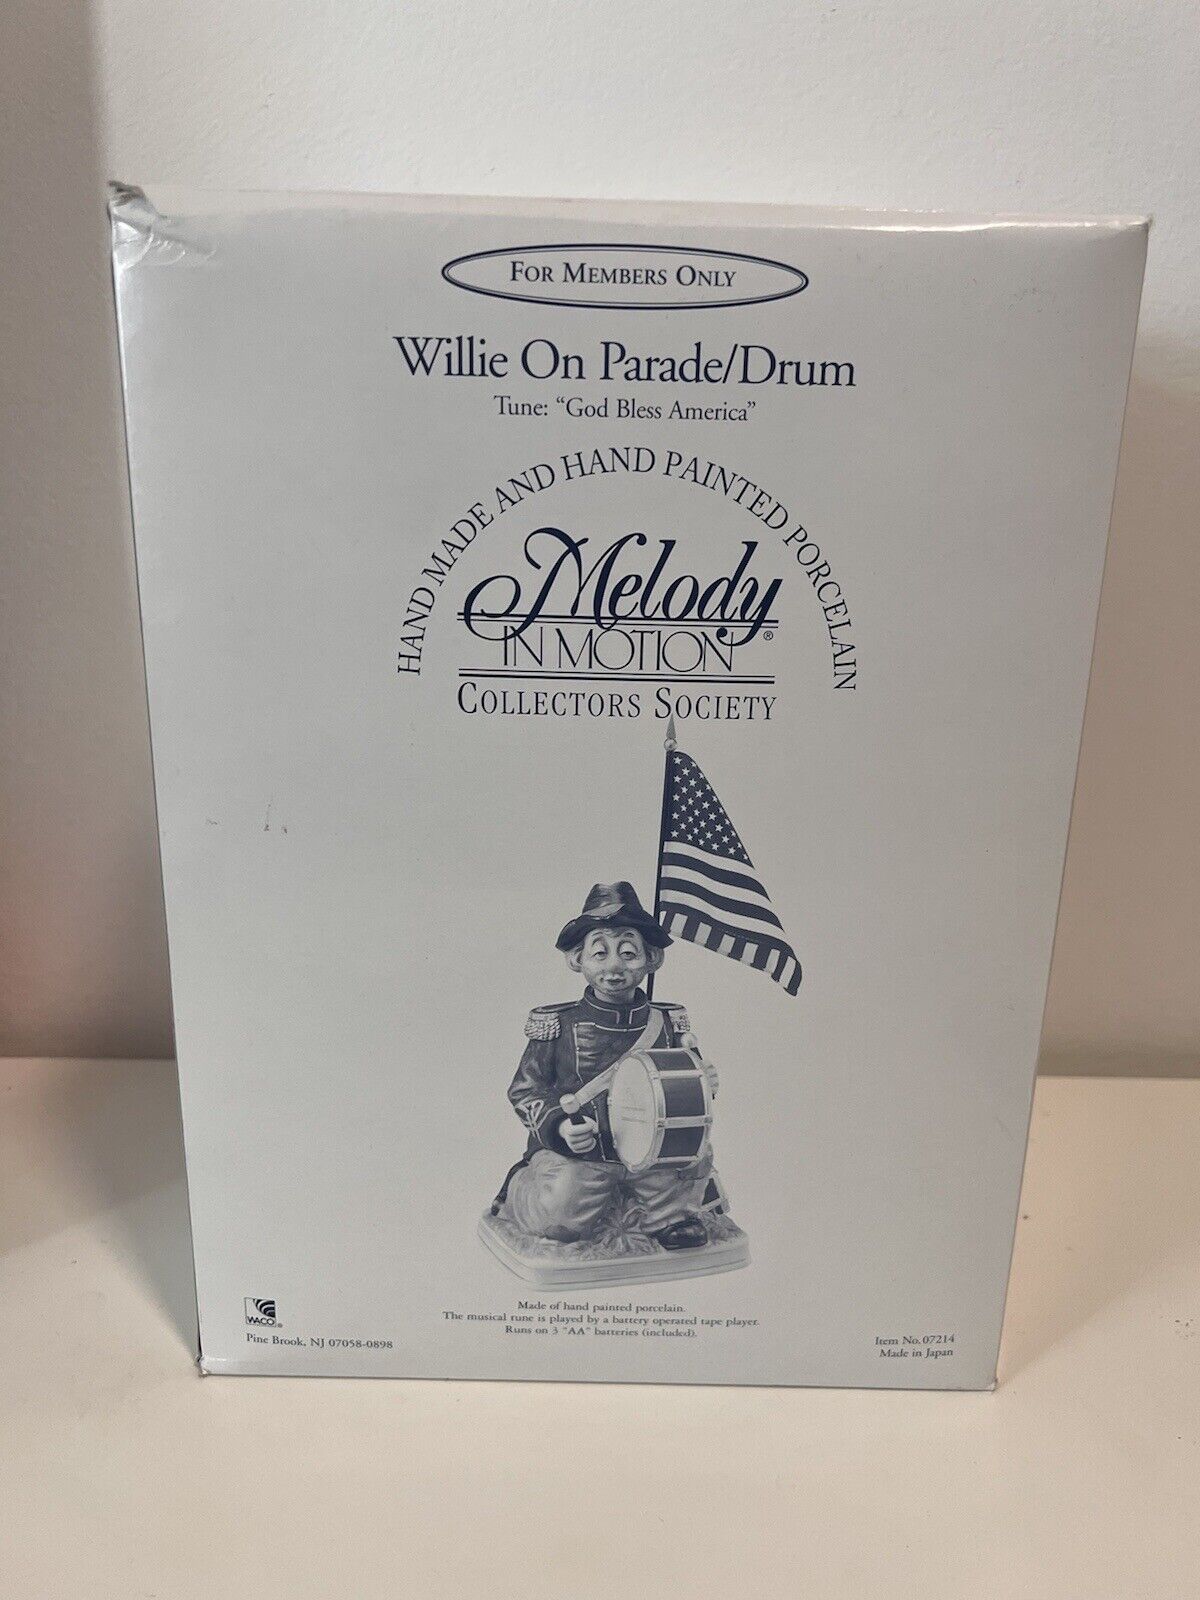 Vintage Willie On Parade/Trumpet Melody in Motion Collectors Society. New In Box